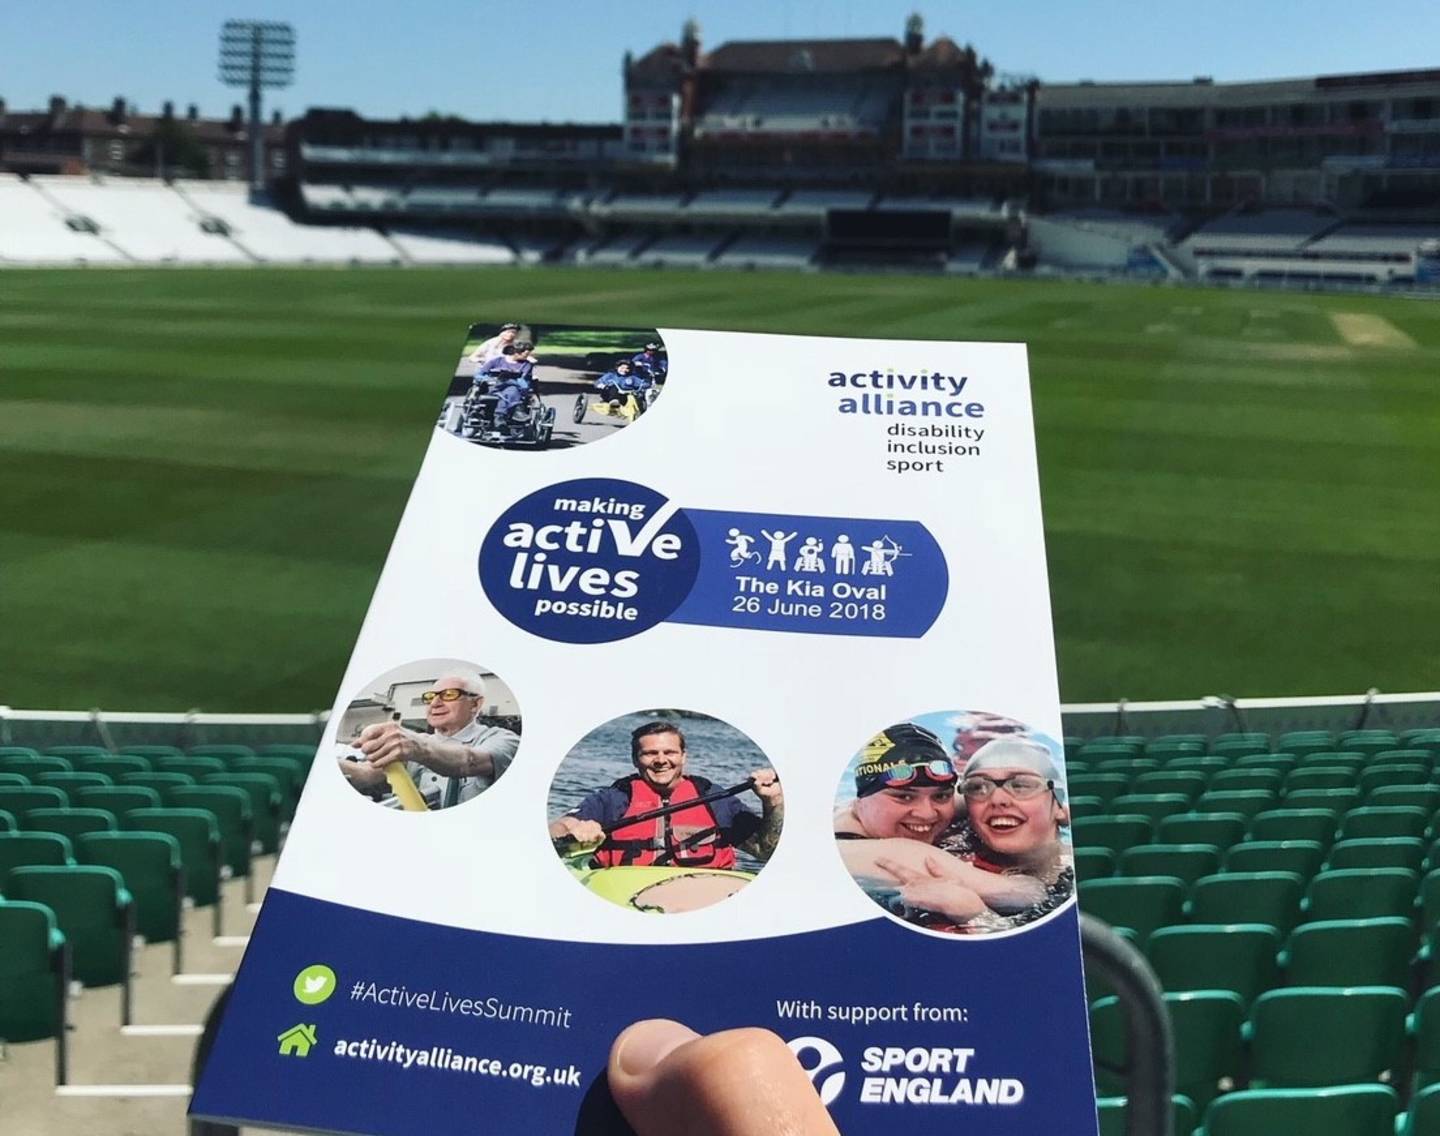 Making Active Lives Possible Summit at The Kia Oval